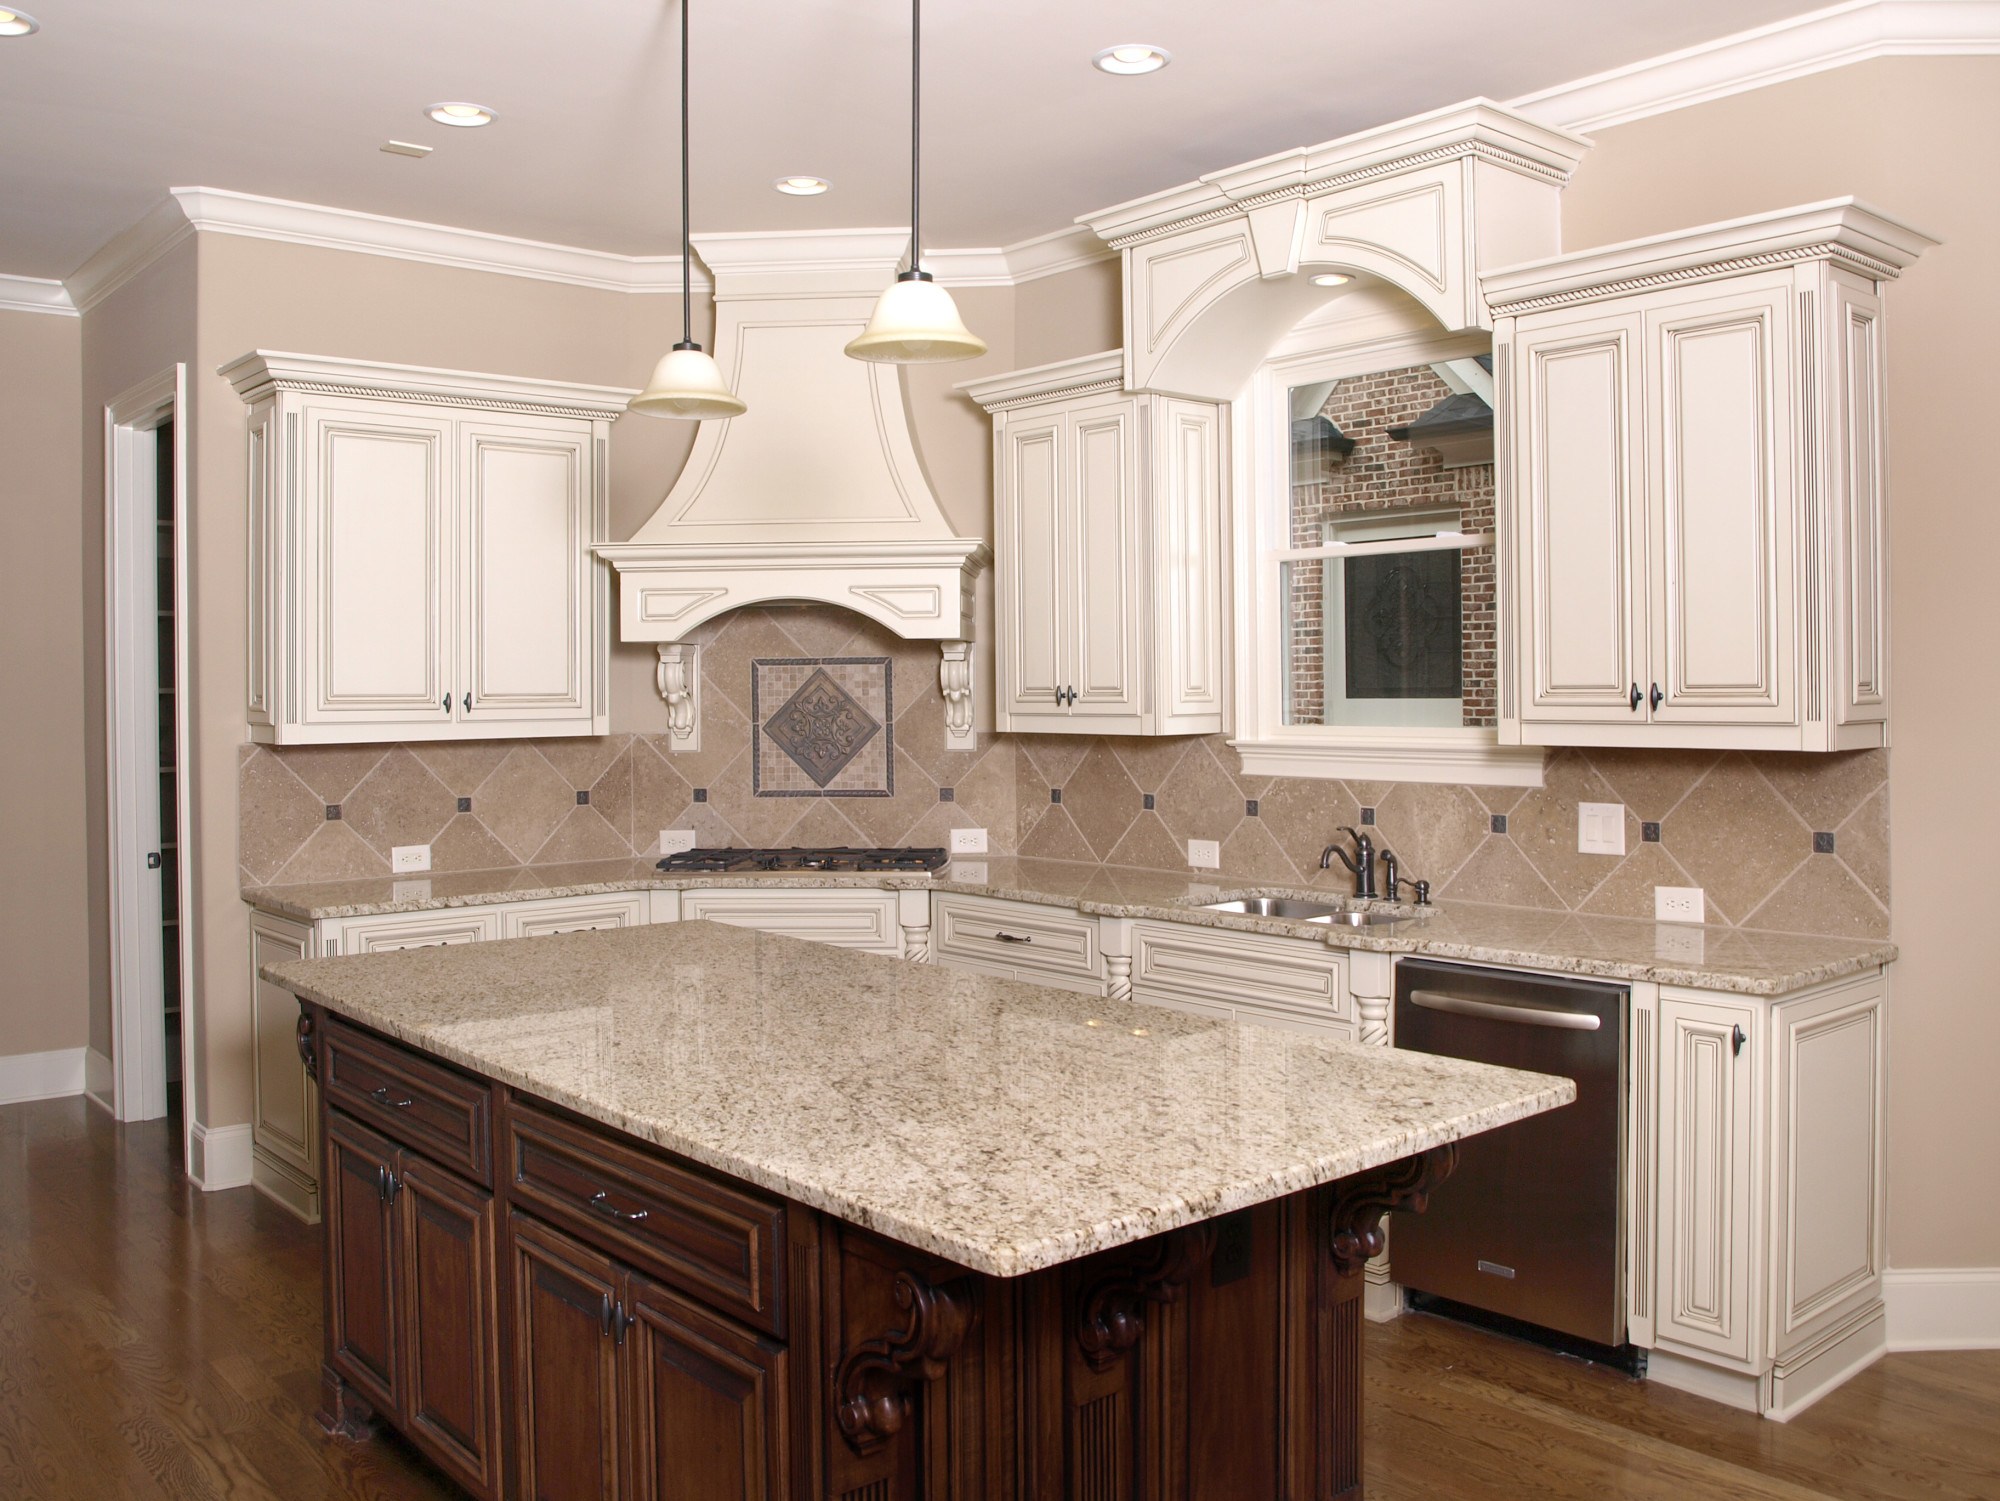 Granite Countertops: Pros and Cons